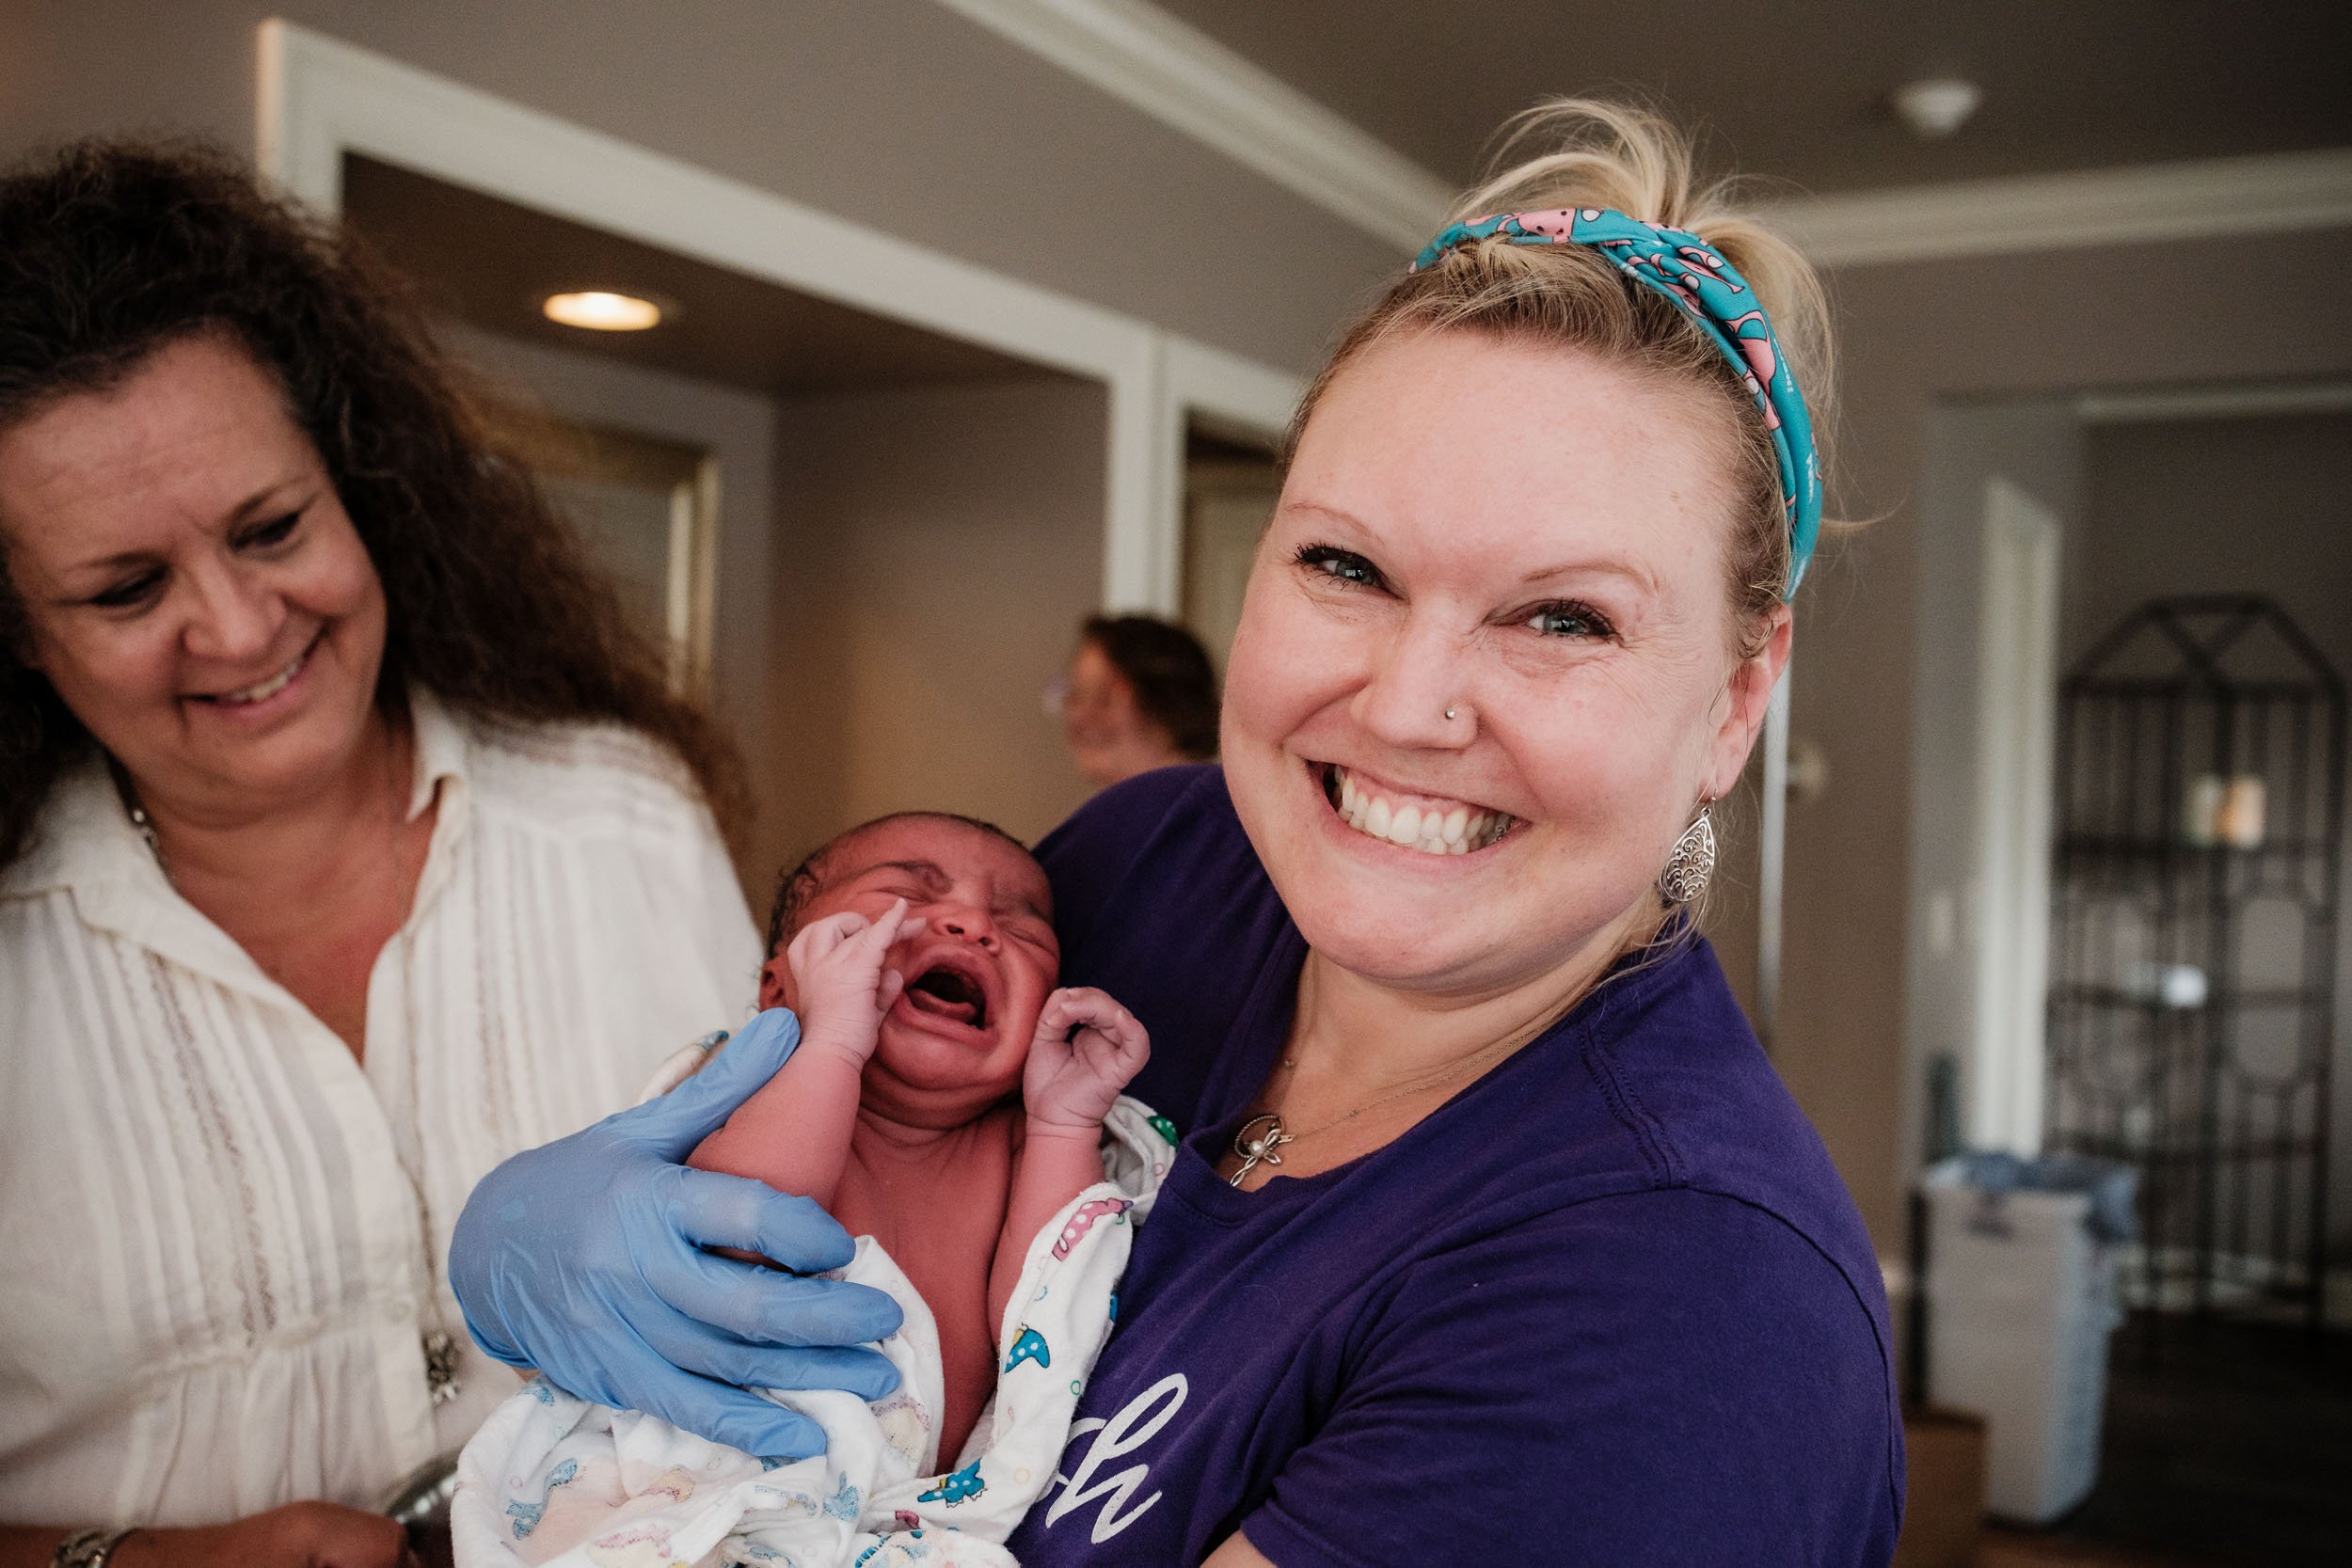 A midwife at Puget Sound Birth Center beams with happiness as she holds a freshly born baby.